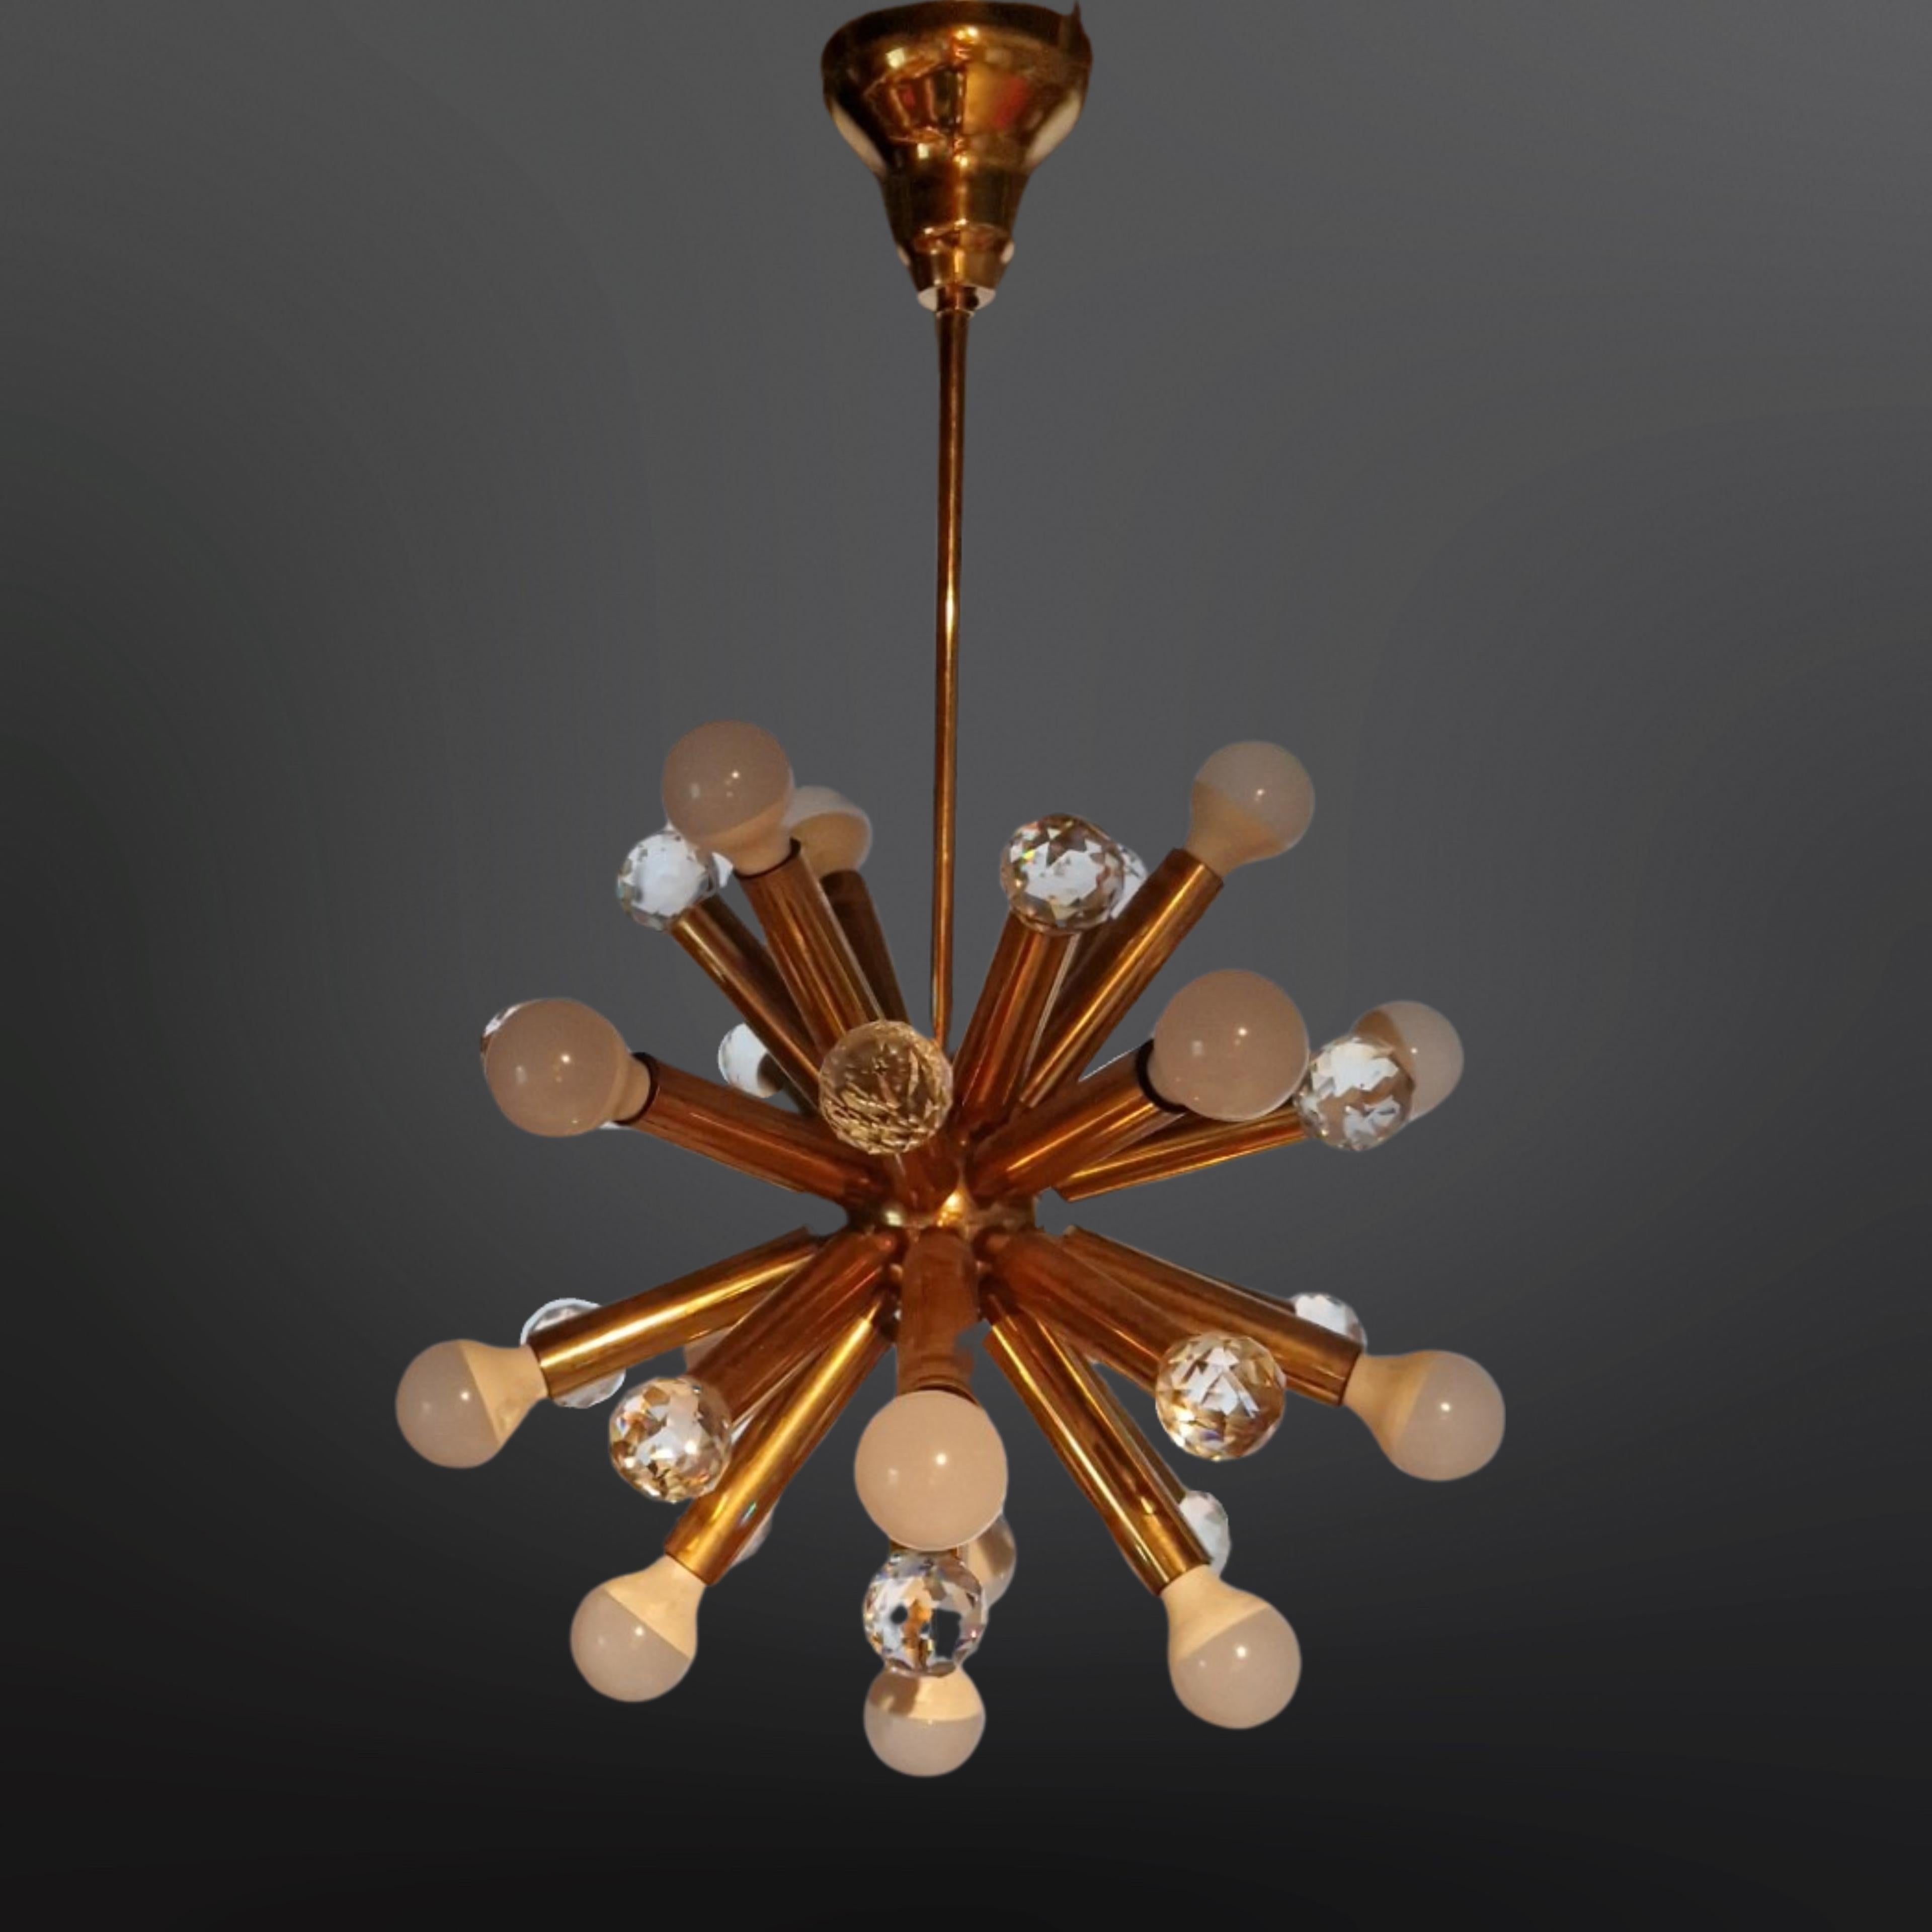 Mid century sputnik chandelier. Designed and made by Ernst Palme in the 1960s, Germany. The lamp has 17 lights and is fitted with 16 facet cut Swarovski crystal globes reflecting the light in every direction. The lamp is completely original and